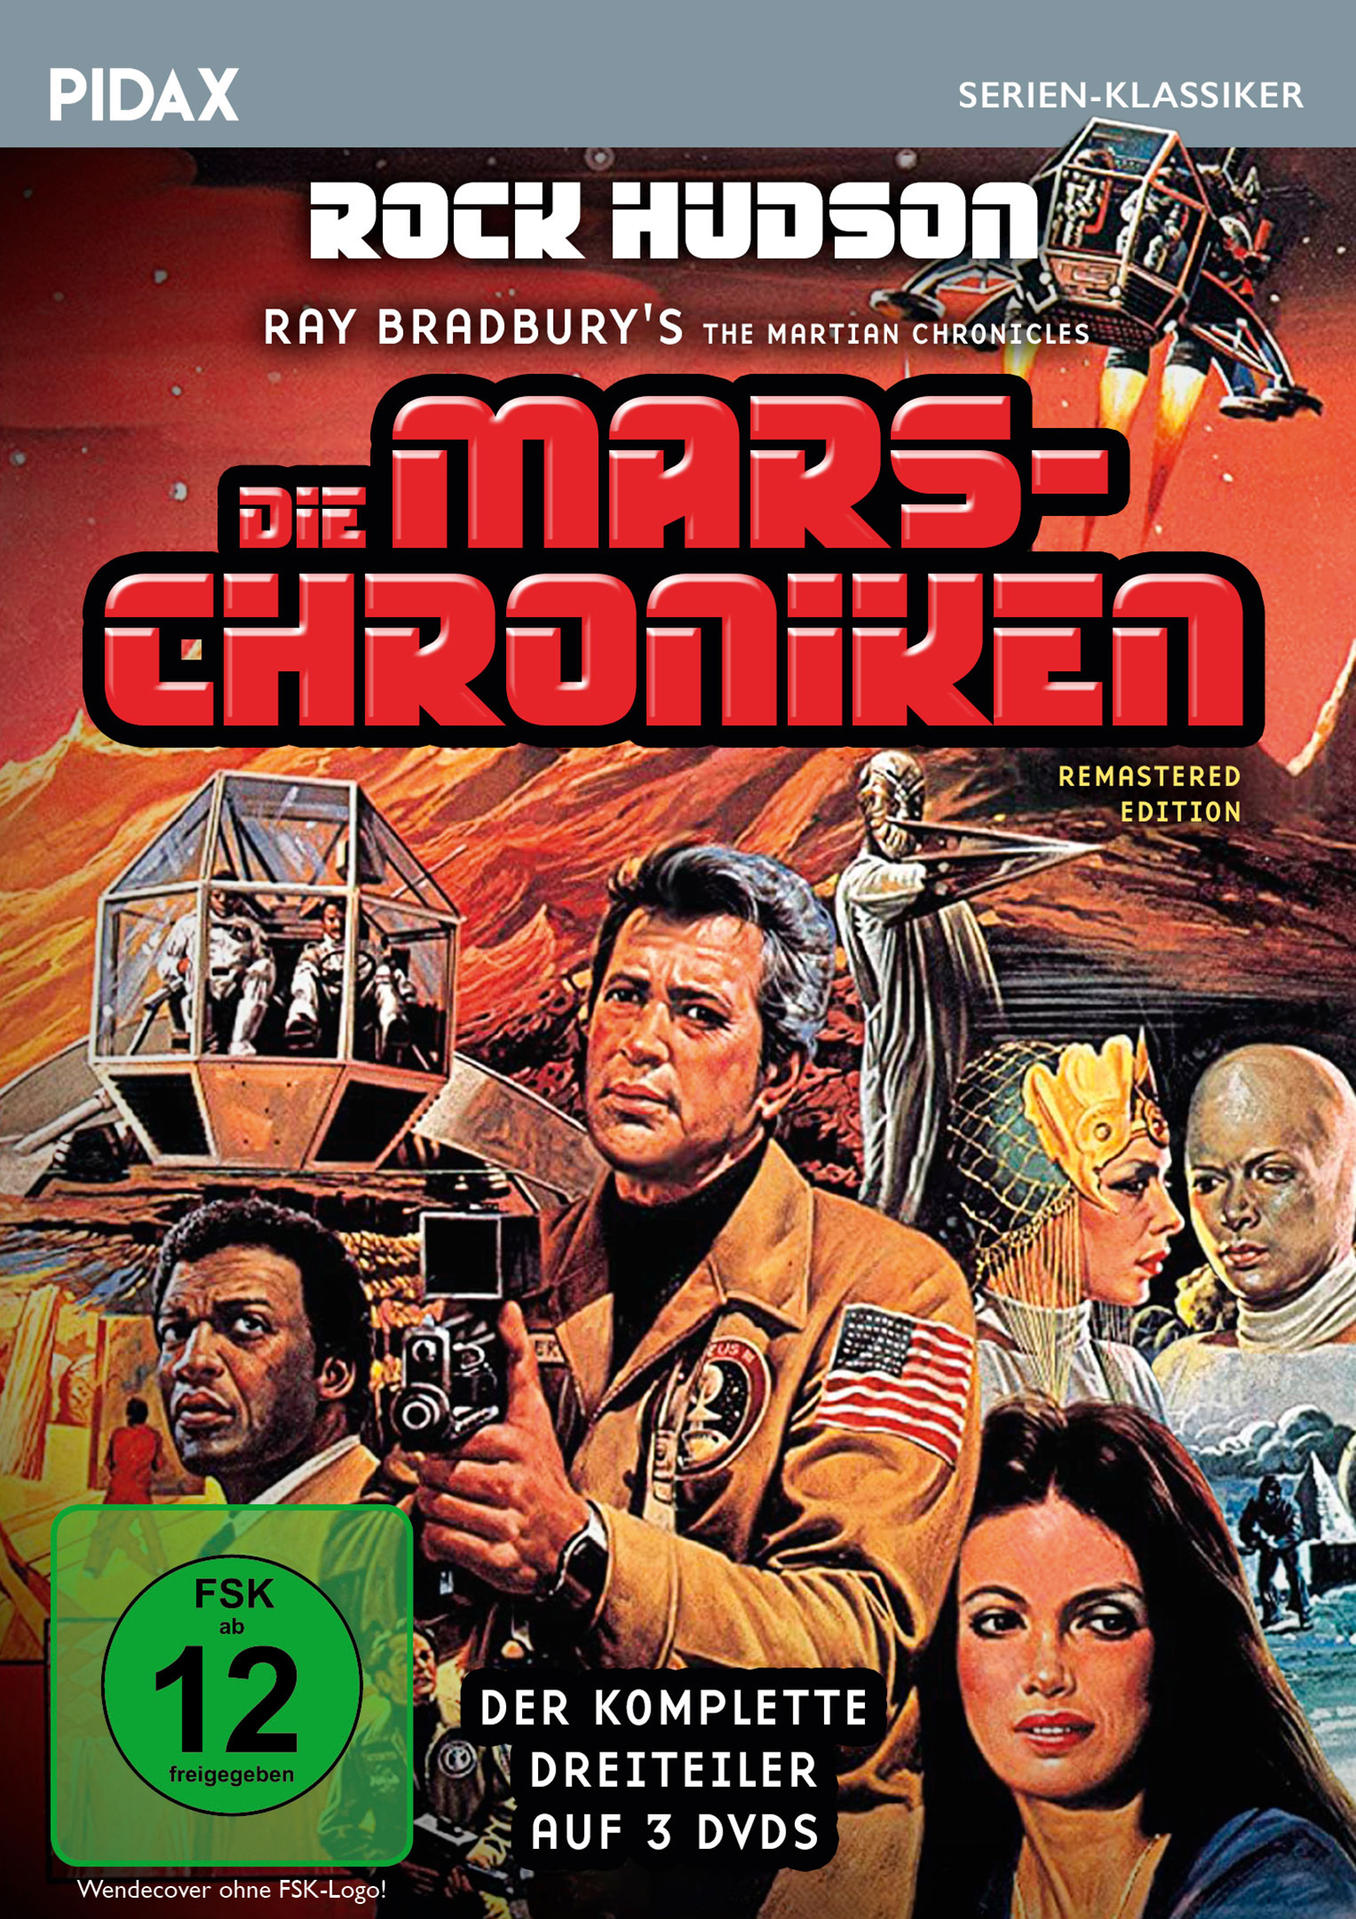 Edition Mars-Chroniken - (The DVD Chronicles) Remastered Die Martian